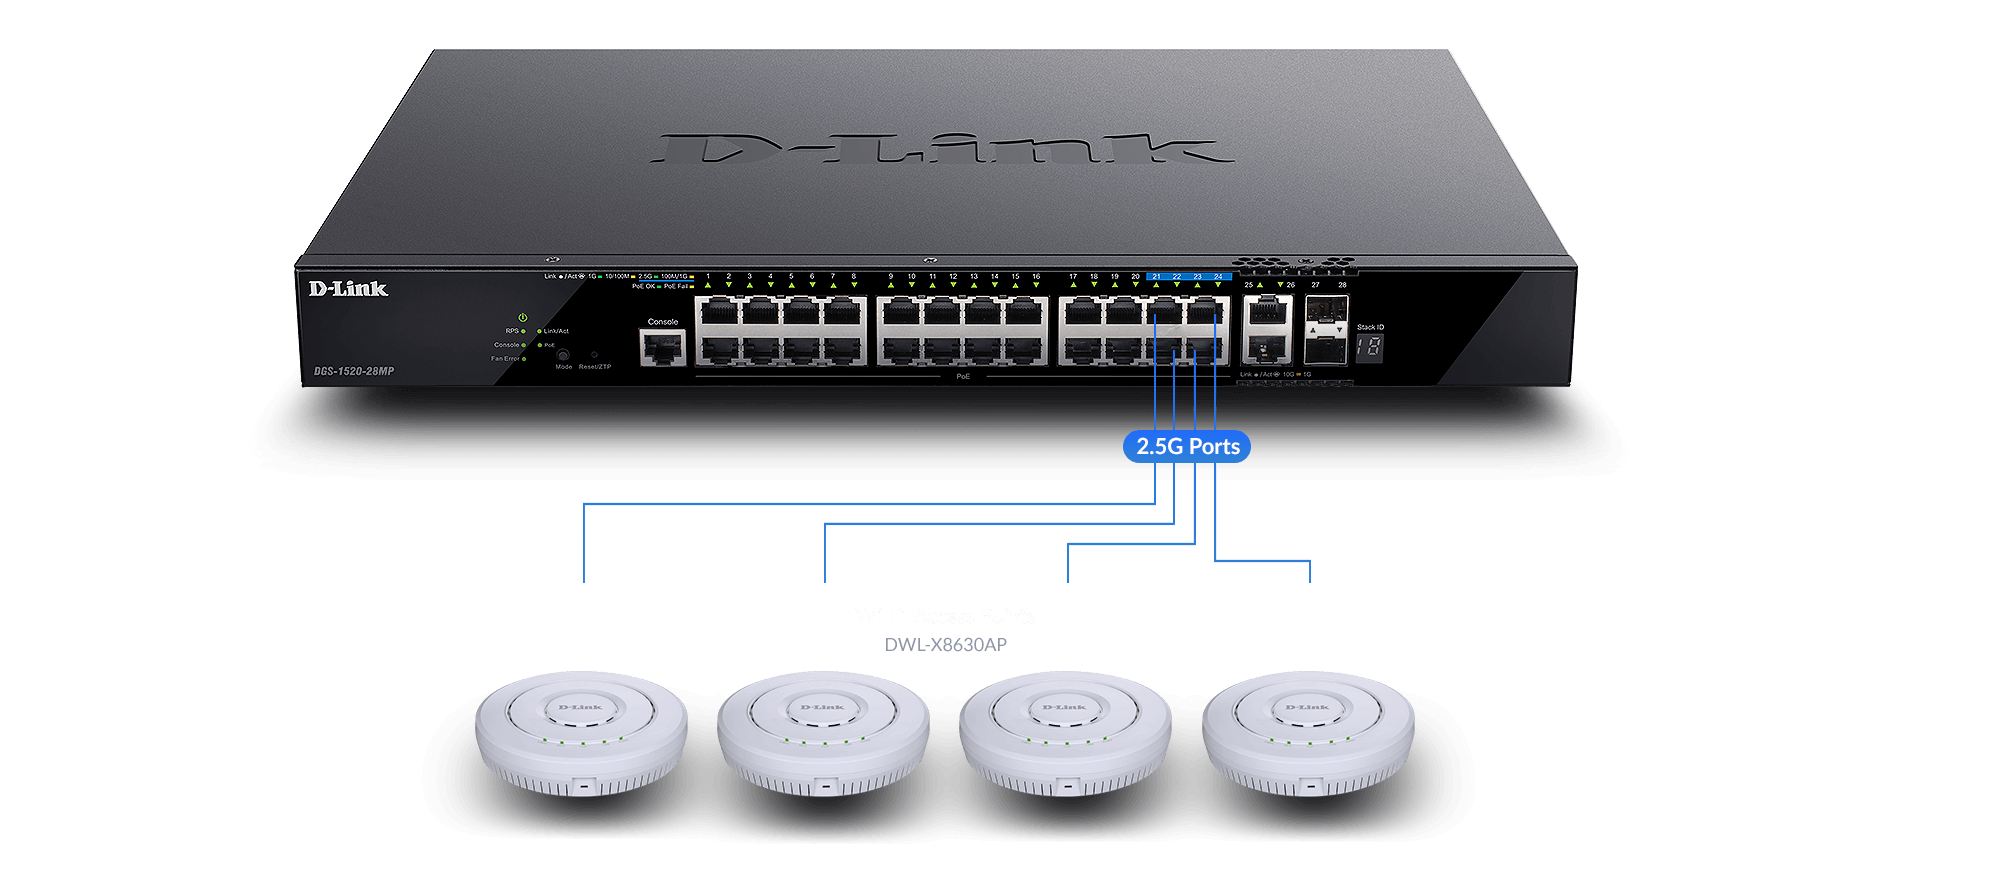 DGS-1520-28MP 2.5G ports connected to four DWL-X8630APs.